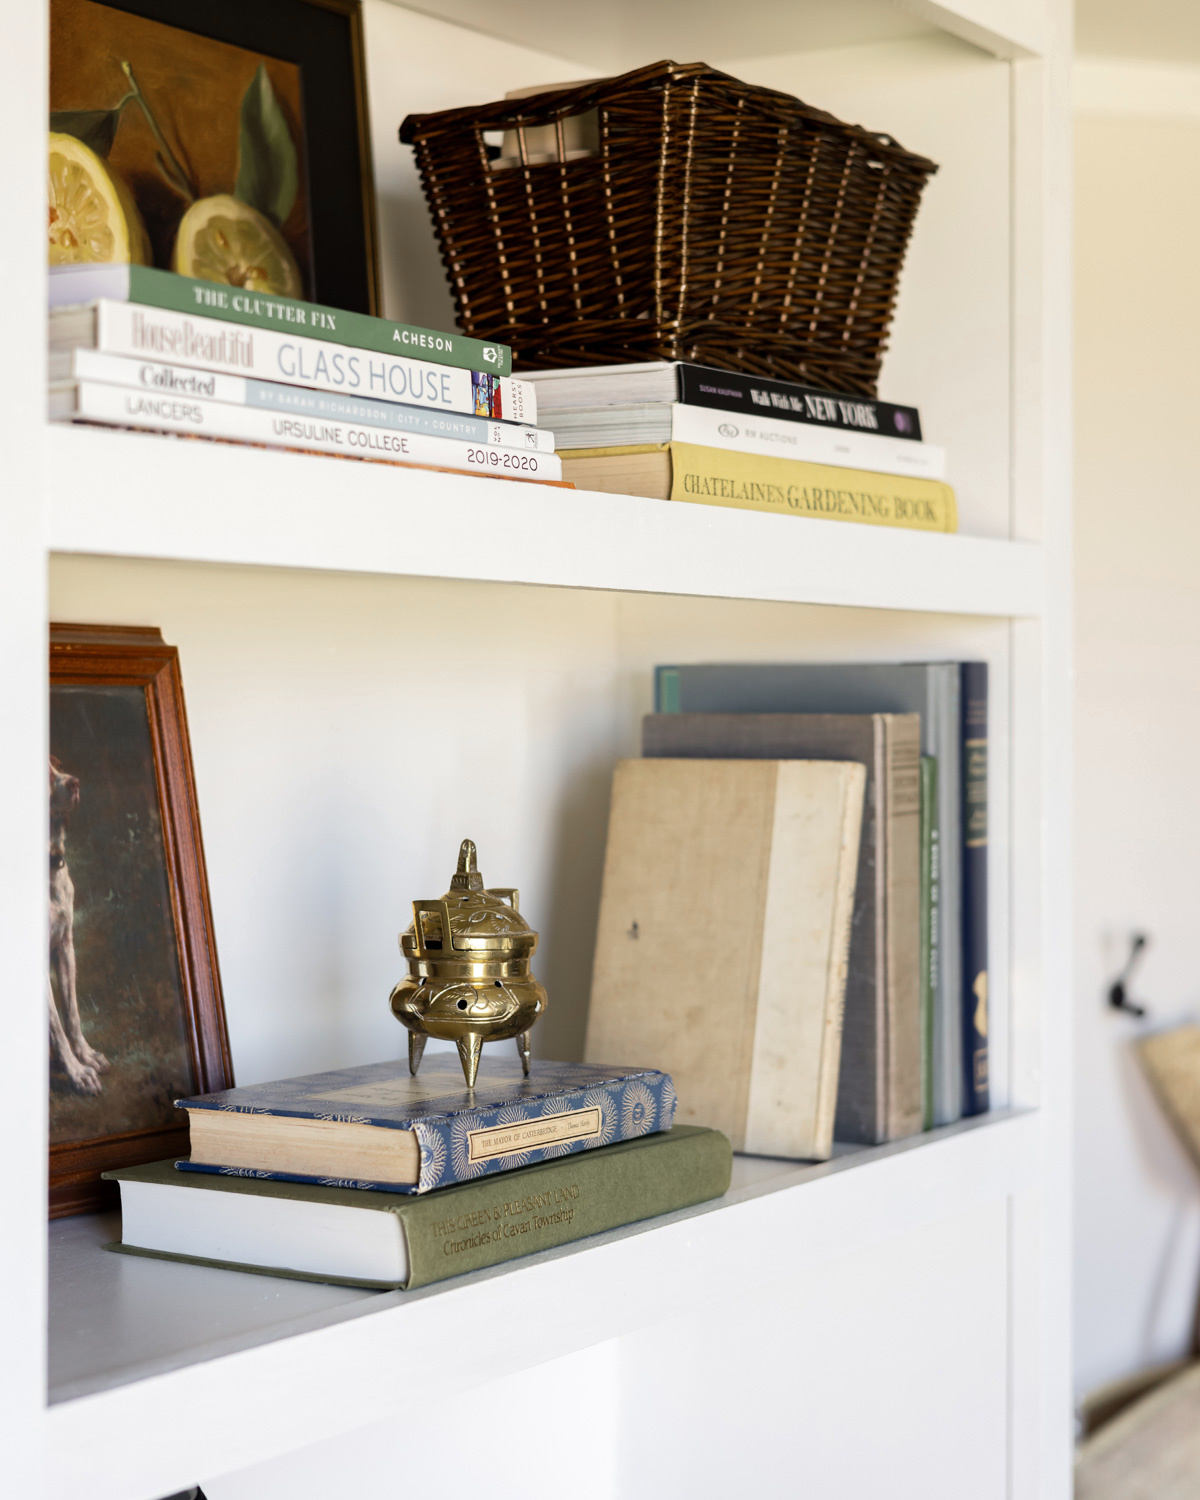 Bookshelf layered with baskets, decorative items, and framed paintings.